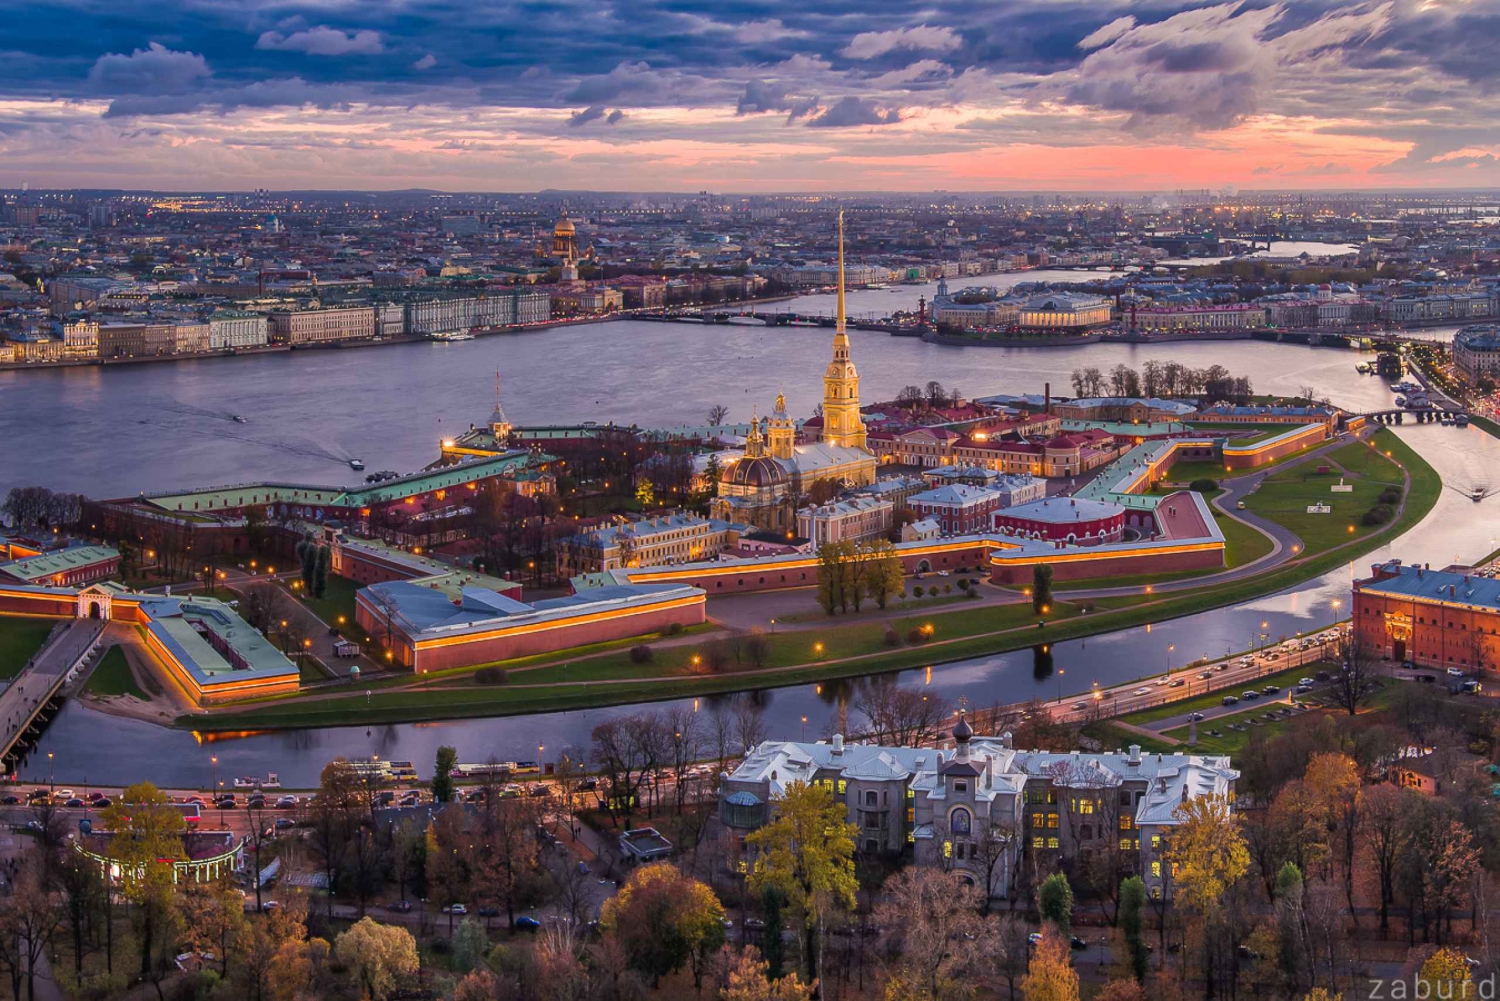 Peter & Paul Fortress Ticket and 2-Hour Group Walking Tour